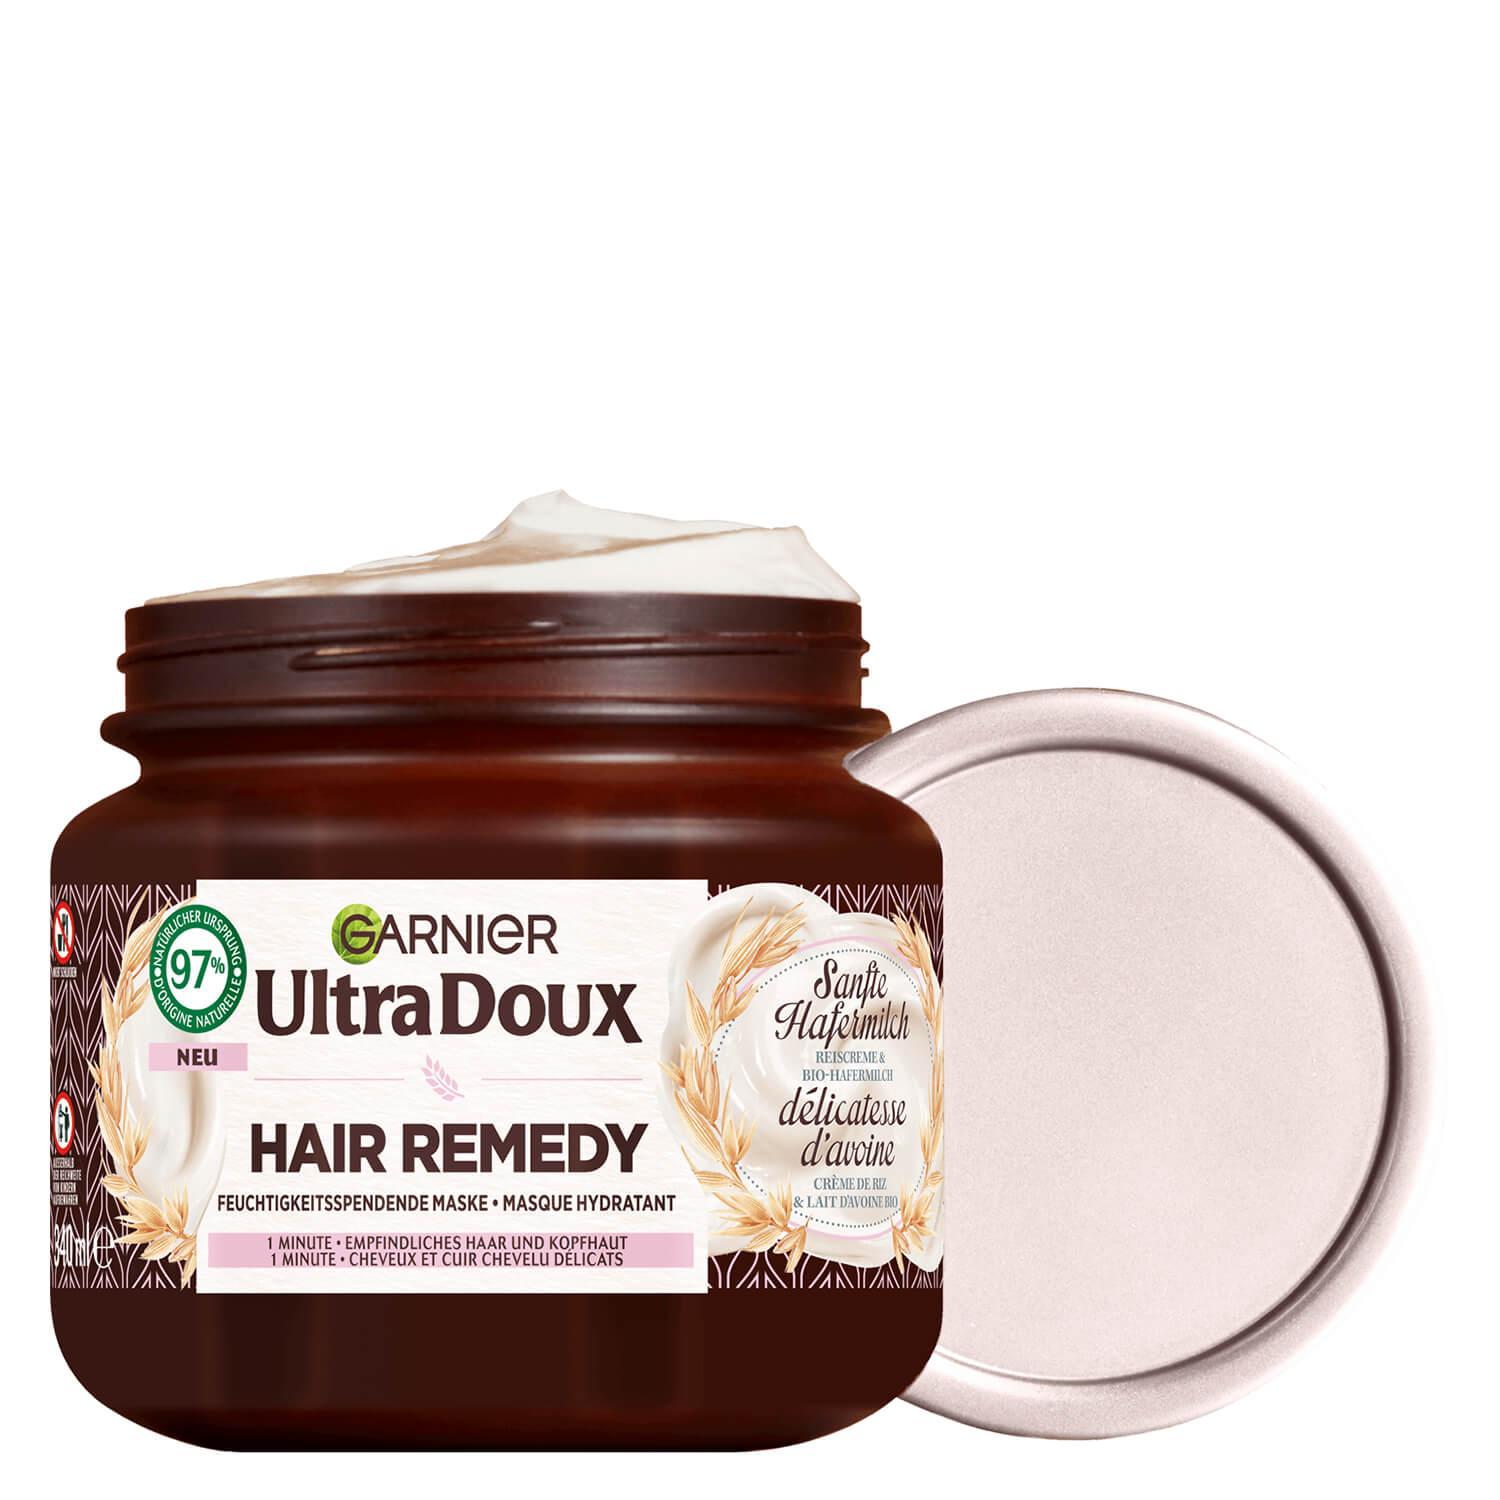 Ultra Doux Haircare - Hair Remedy Sanfte Hafermilch Mask